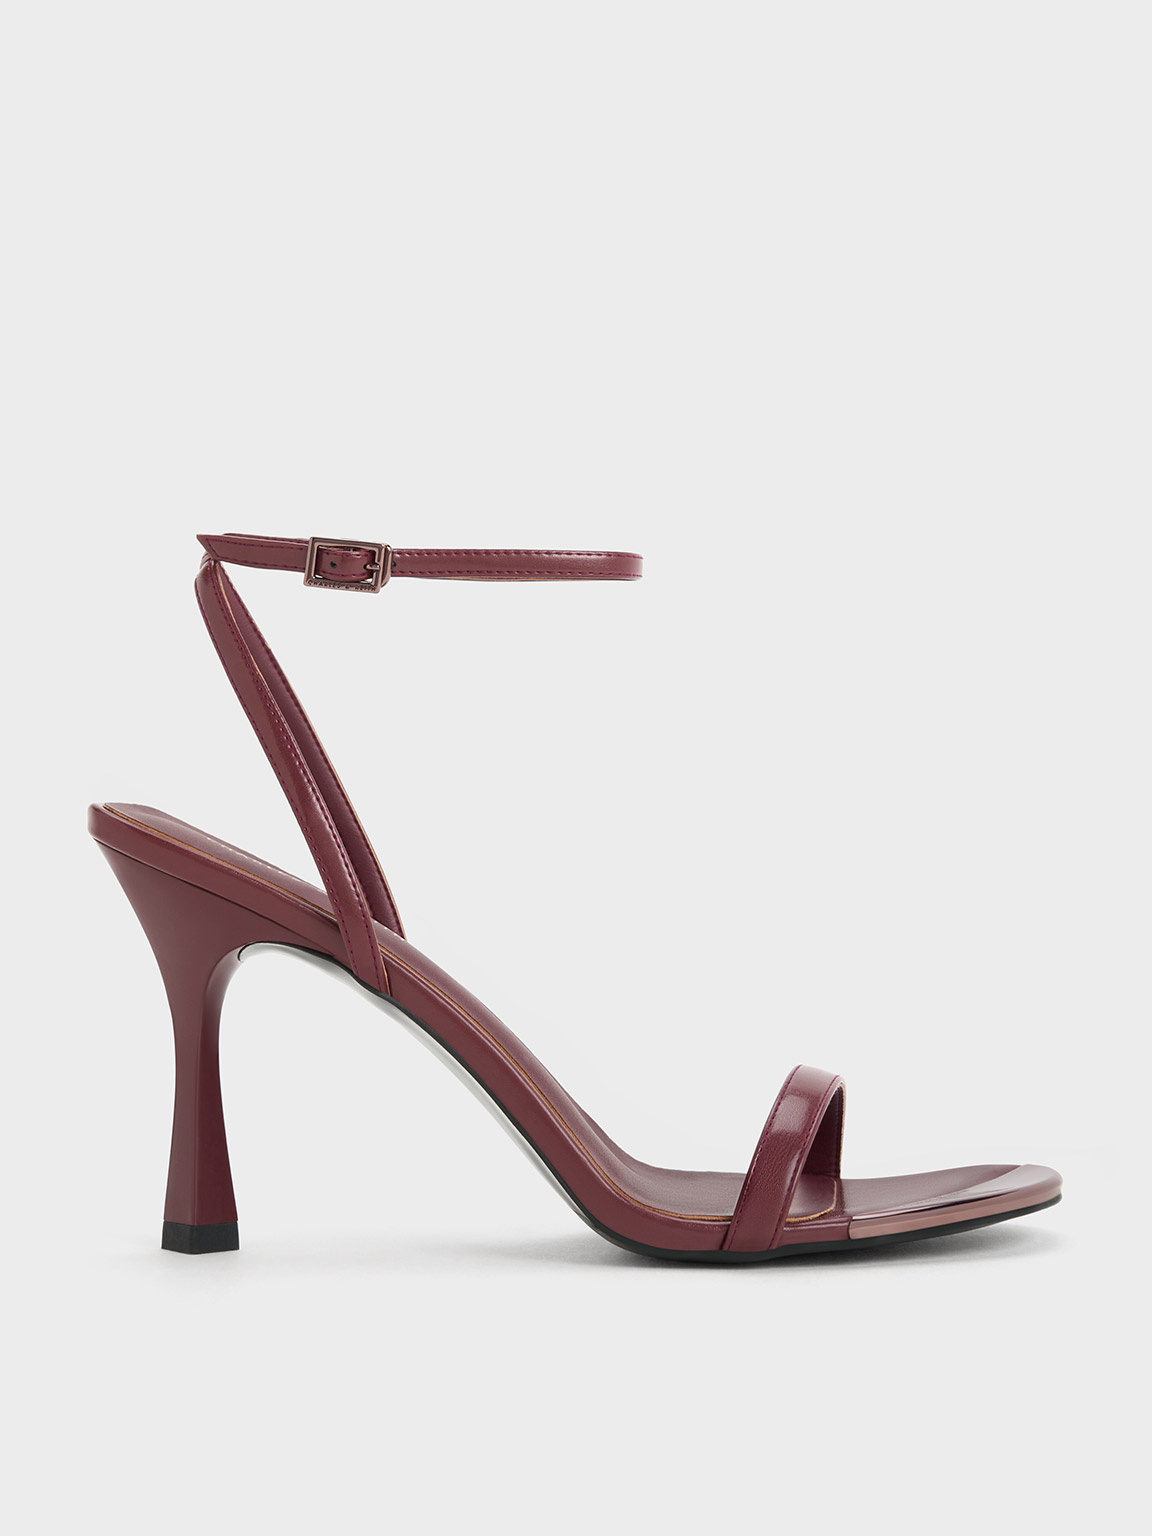 Buy Maroon Heels Online In India At Best Price Offers | Tata CLiQ